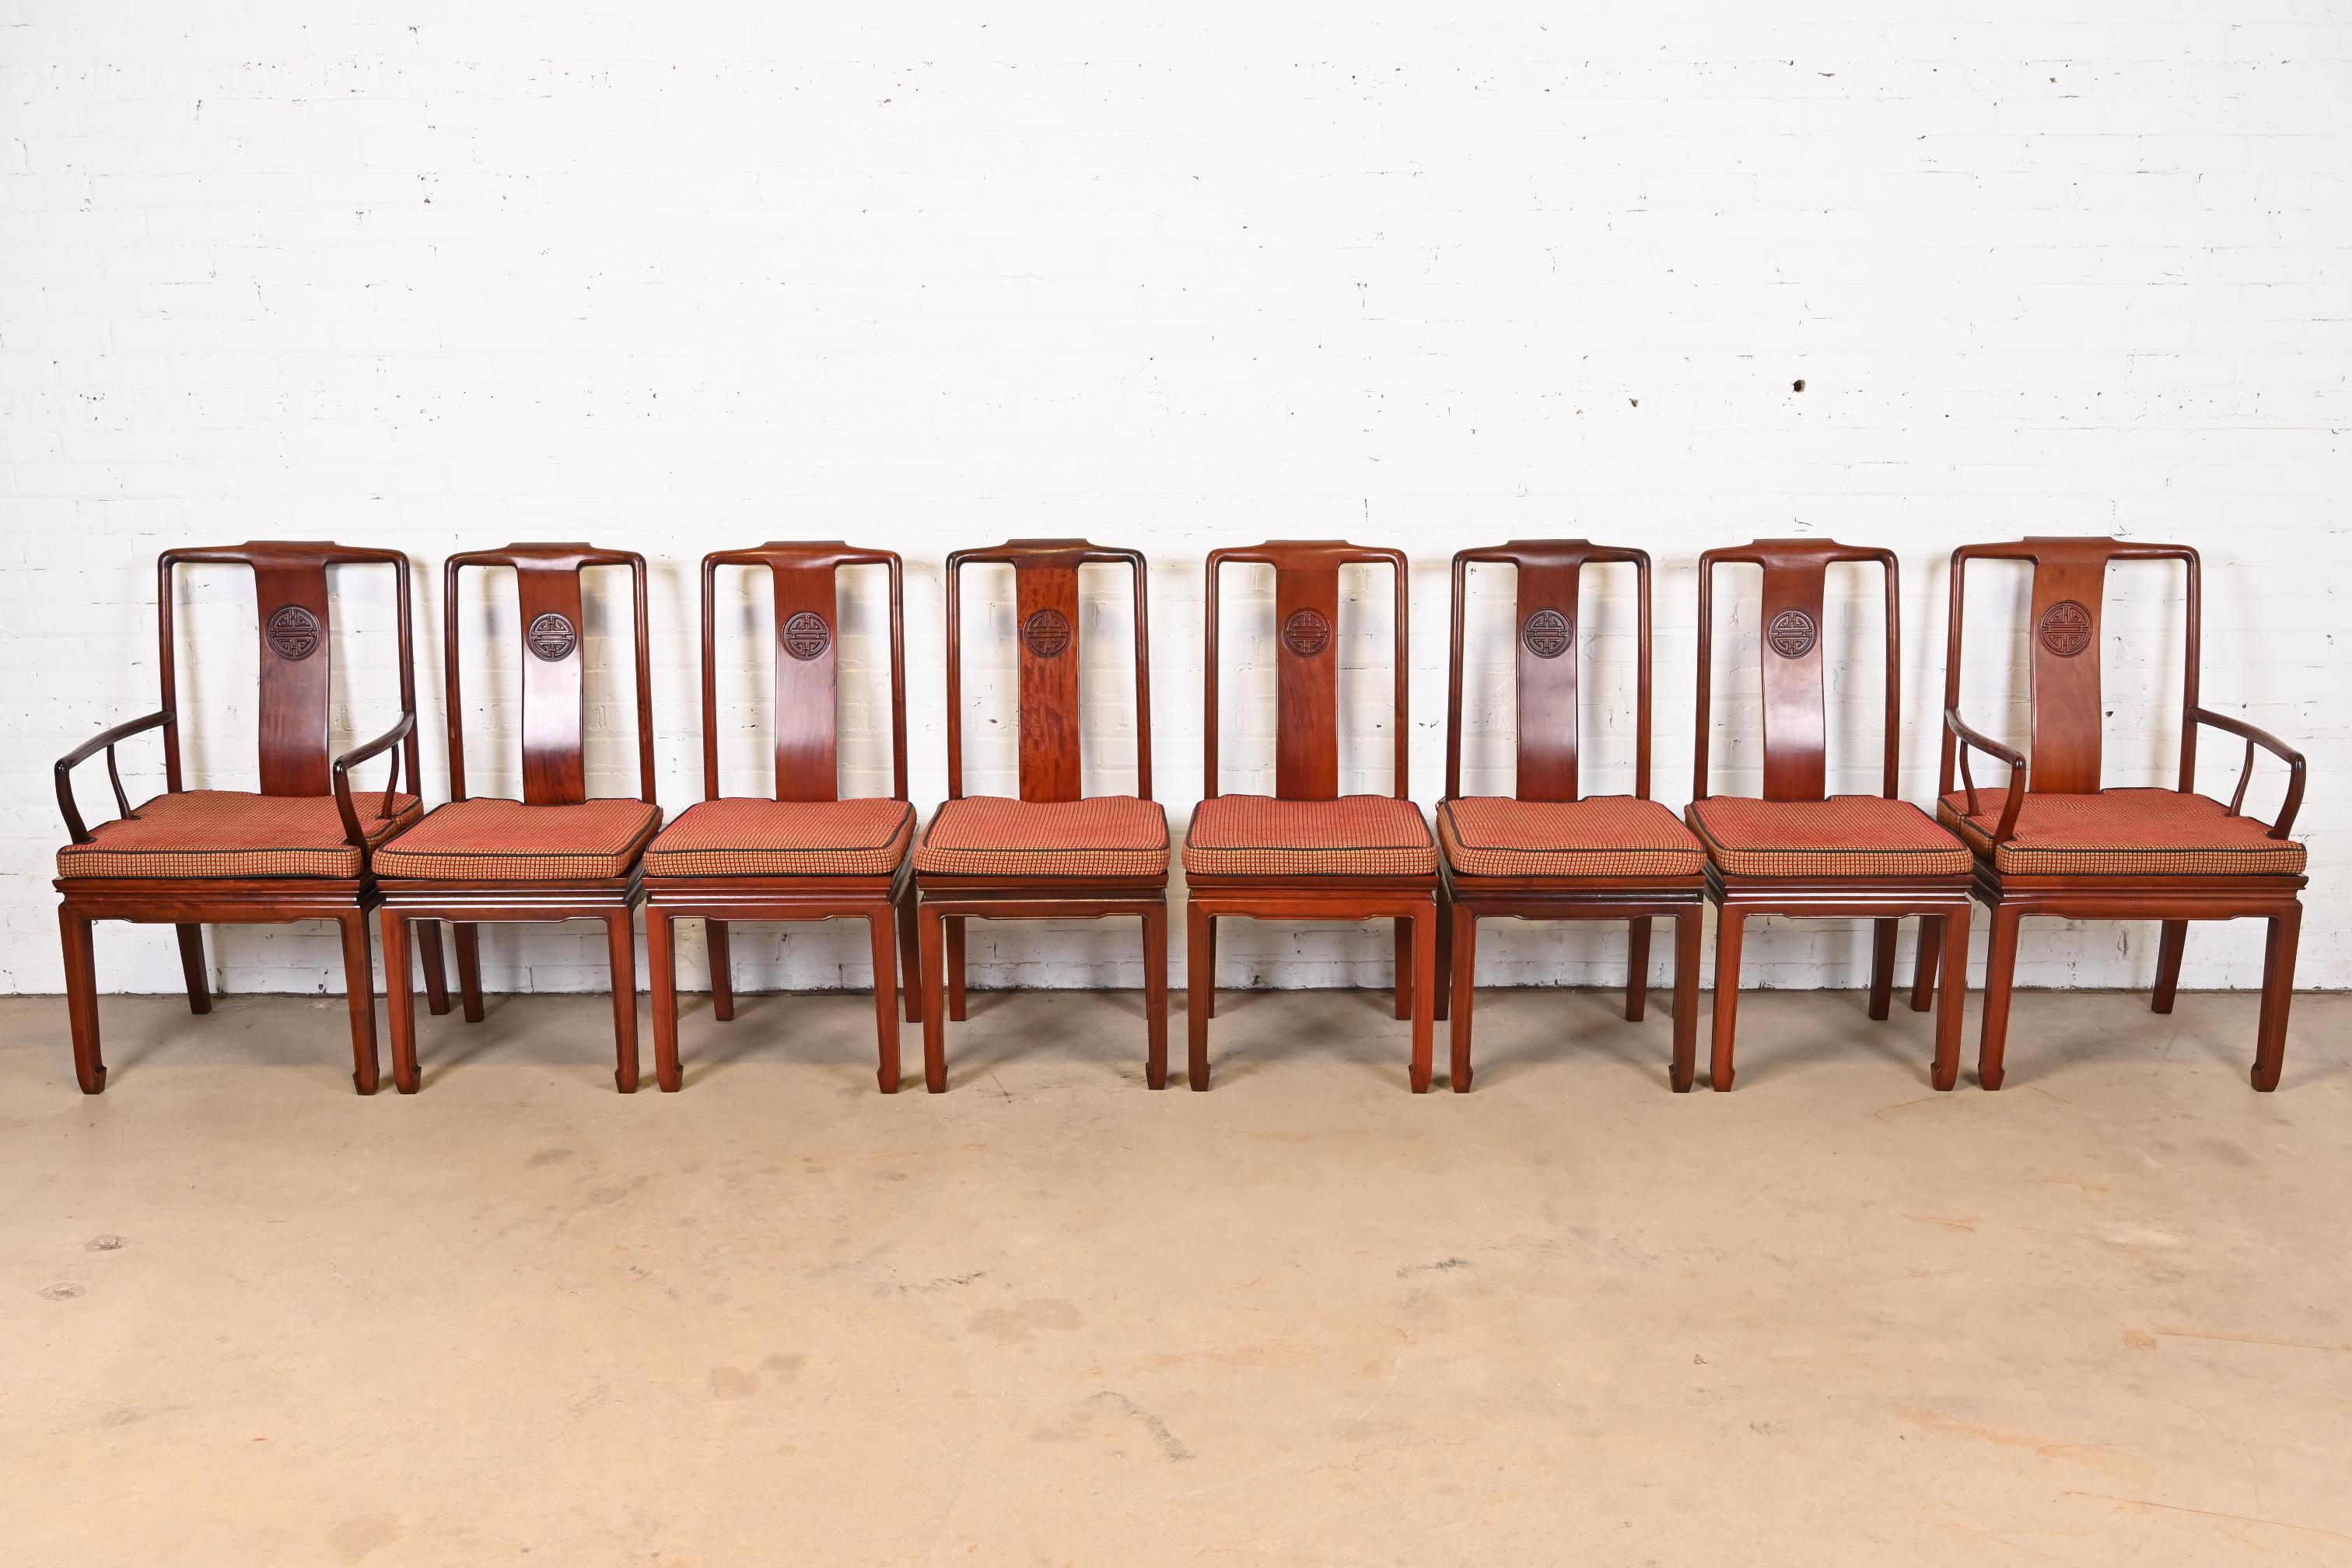 A gorgeous set of eight mid-century modern Hollywood Regency Chinoiserie dining chairs

In the manner of Henredon

USA, Mid-20th Century

Solid carved rosewood frames, with removable upholstered seat cushions.

Measures:
Side chairs - 18